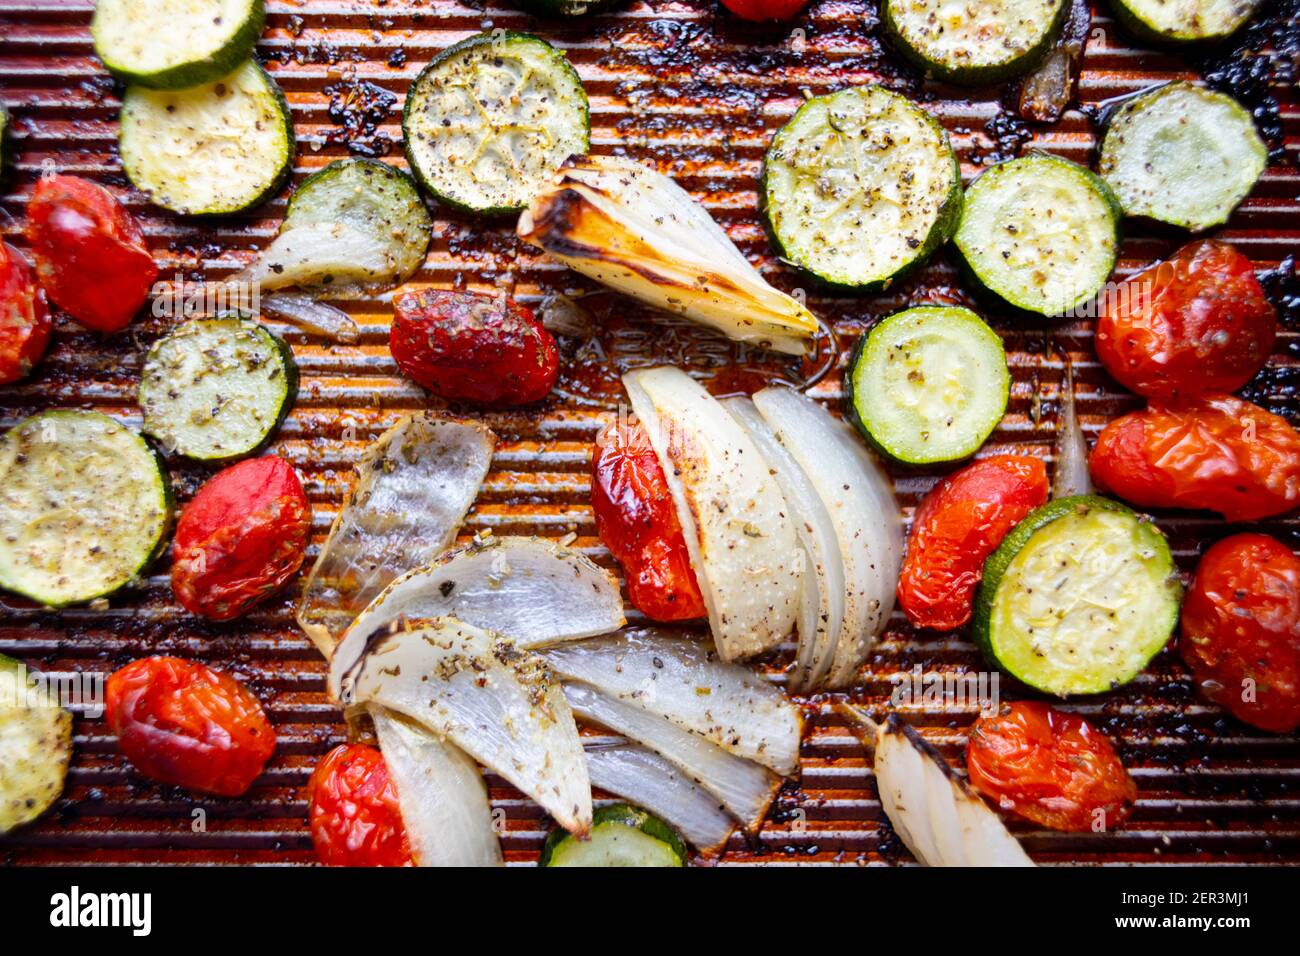 Food Sheet pan roasted vegetables zucchini onions cherry tomatoes Stock Photo